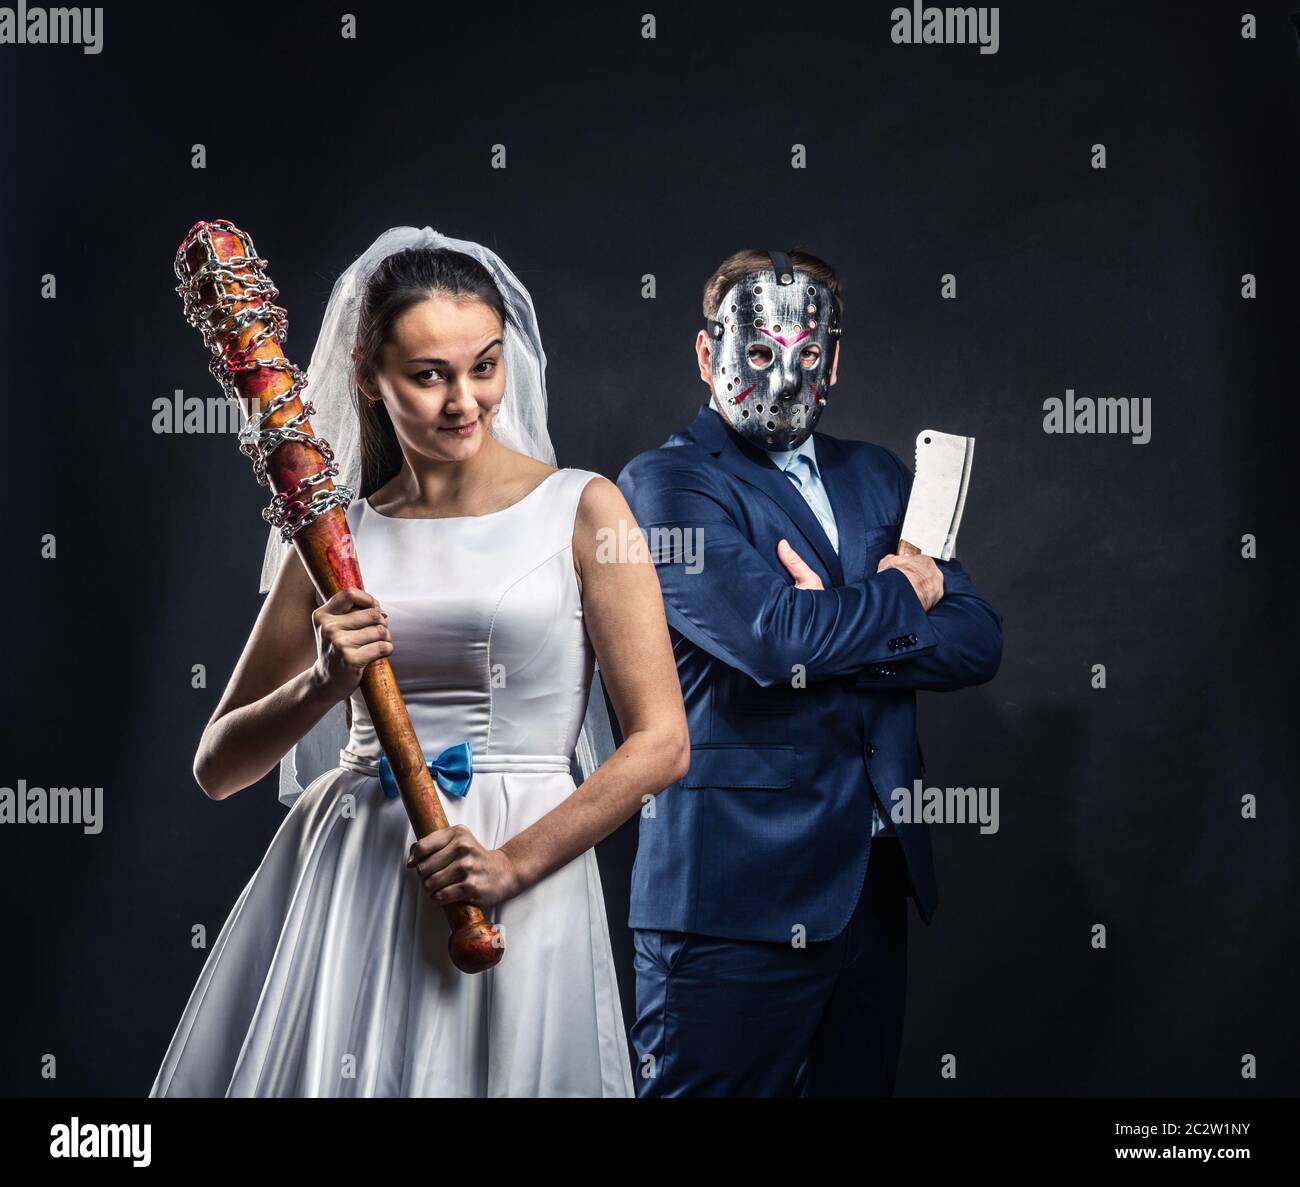 Newlyweds serial murderers with bloody bat and meat cleaver, black background. Groom in hockey mask Stock Photo